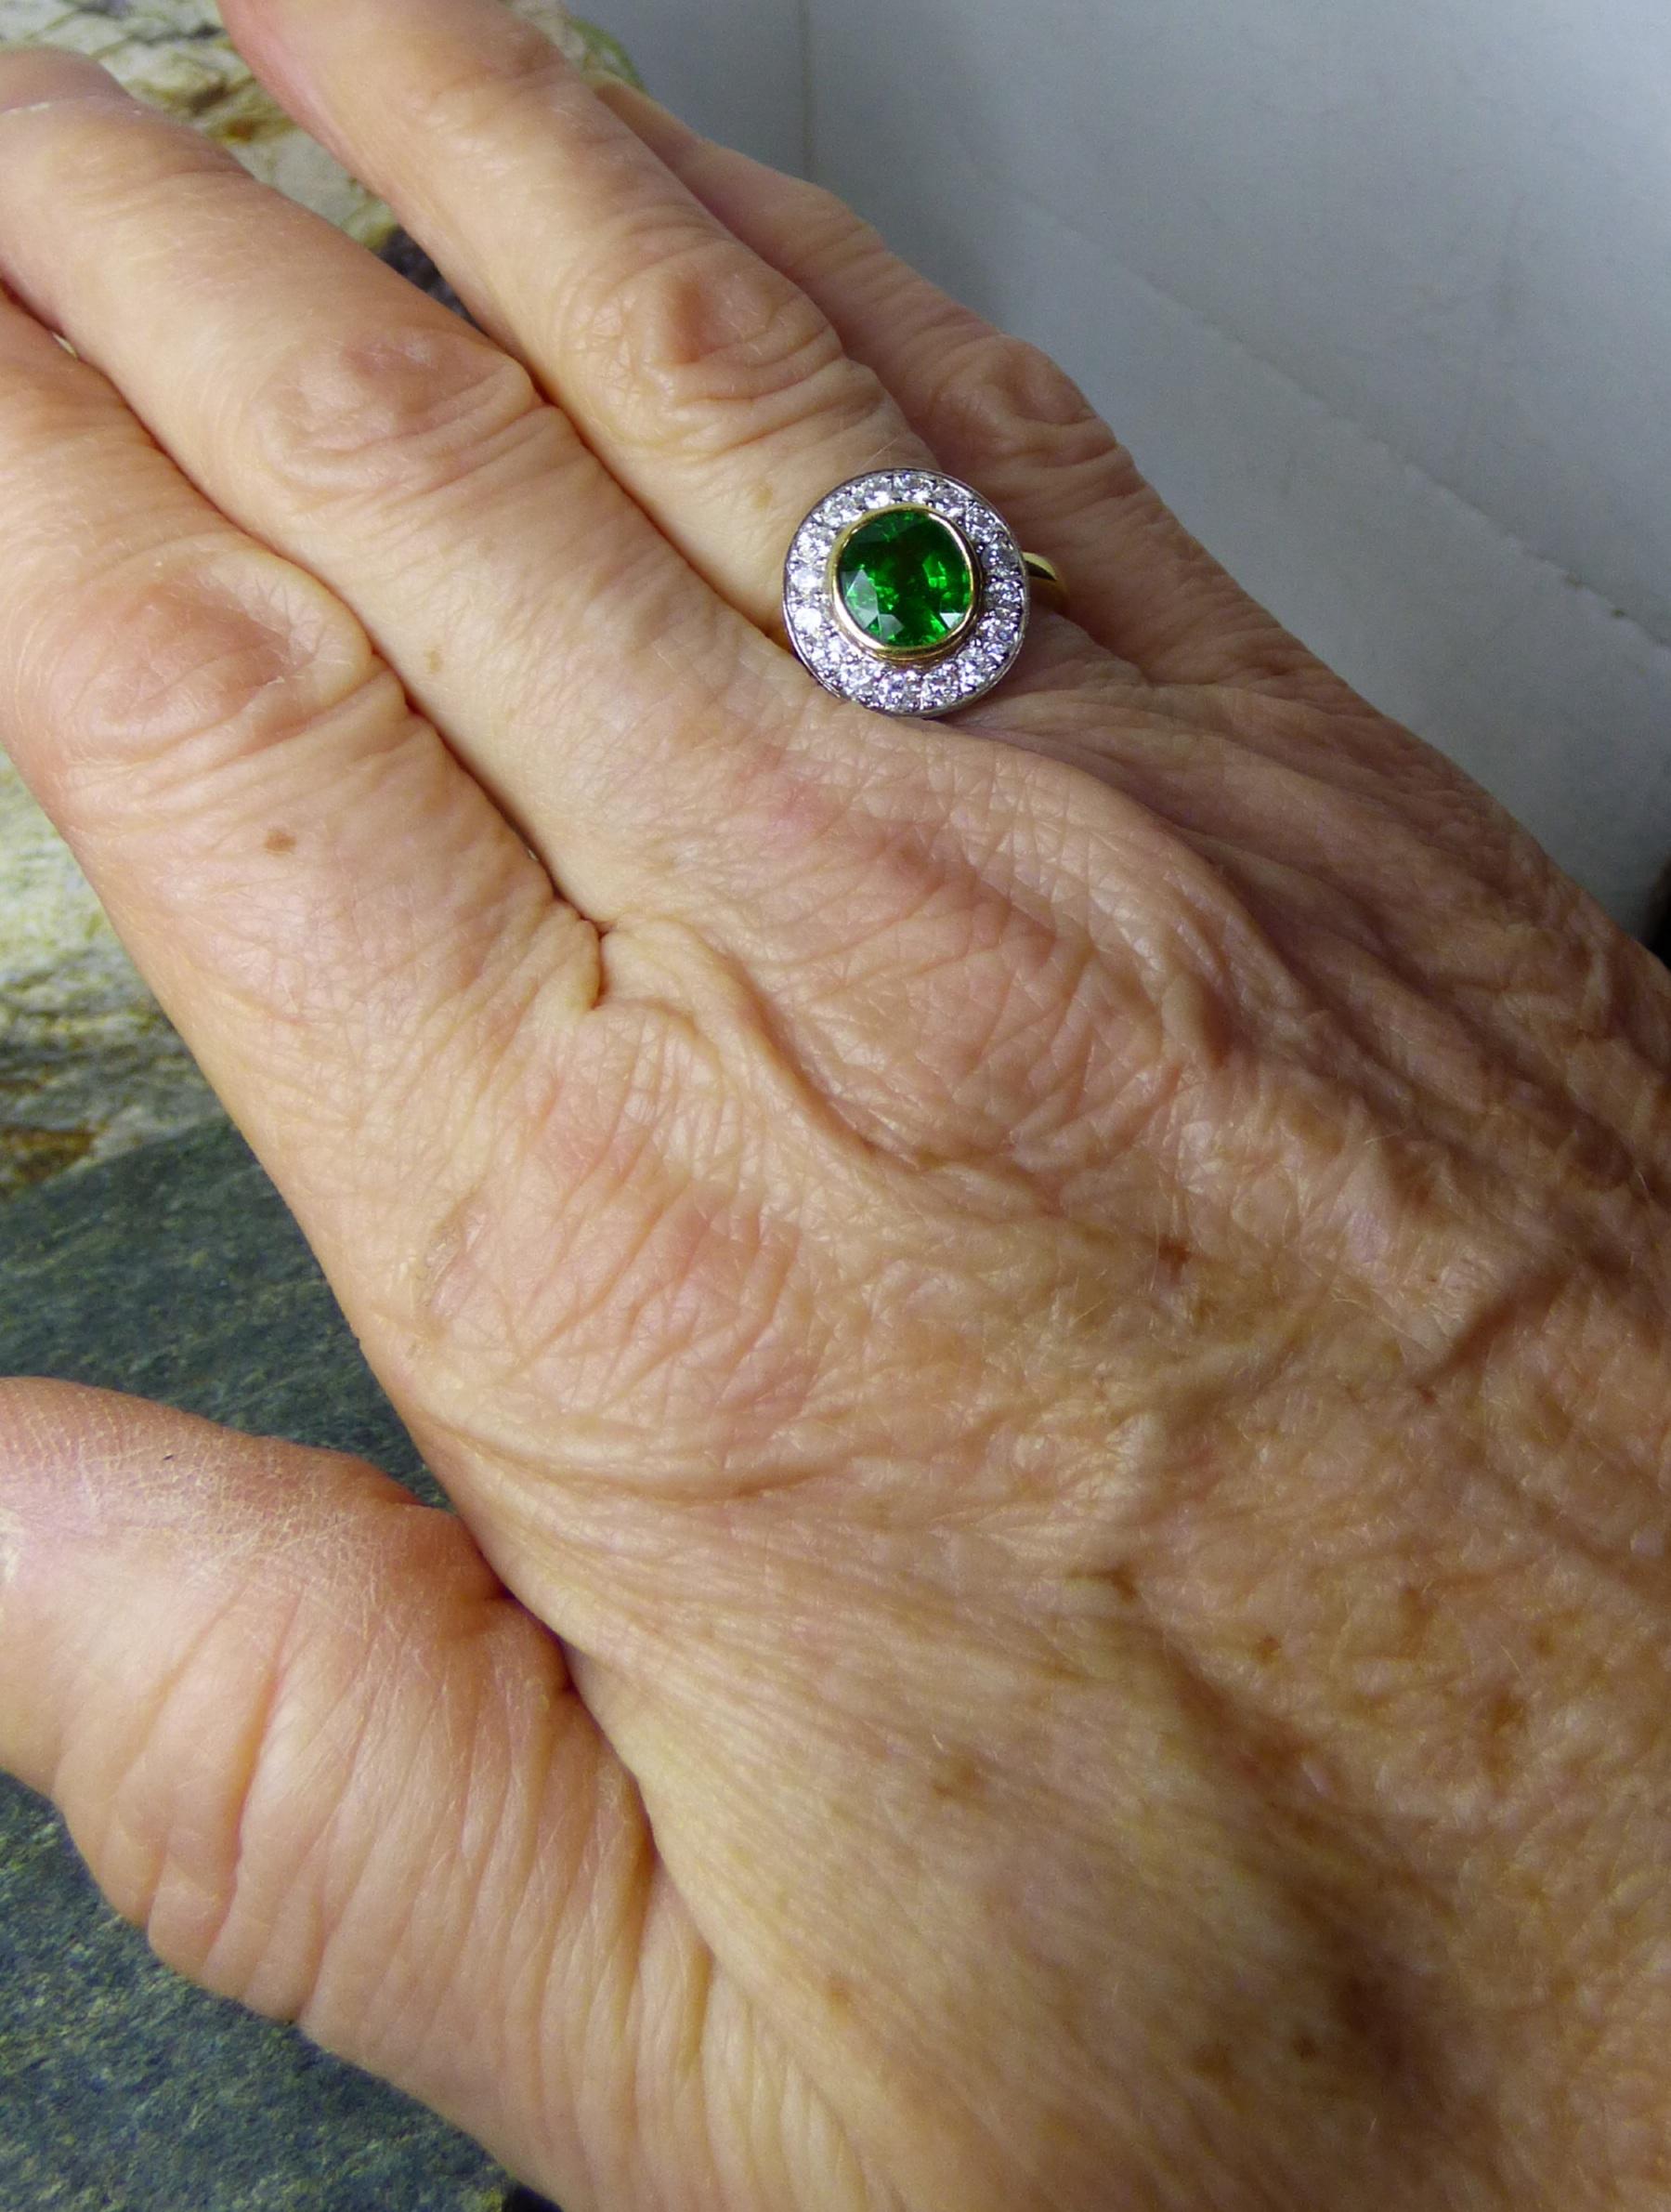 A delightfully bright and colourful Tsavorite Garnet oval stone is 7X6mm and weighs 3.01ct. The Garnet is surrounded by 16 Diamonds with a total weight of .76ct.  The ring is handmade in 18k yellow gold with the Diamonds set in 18K white gold.  The